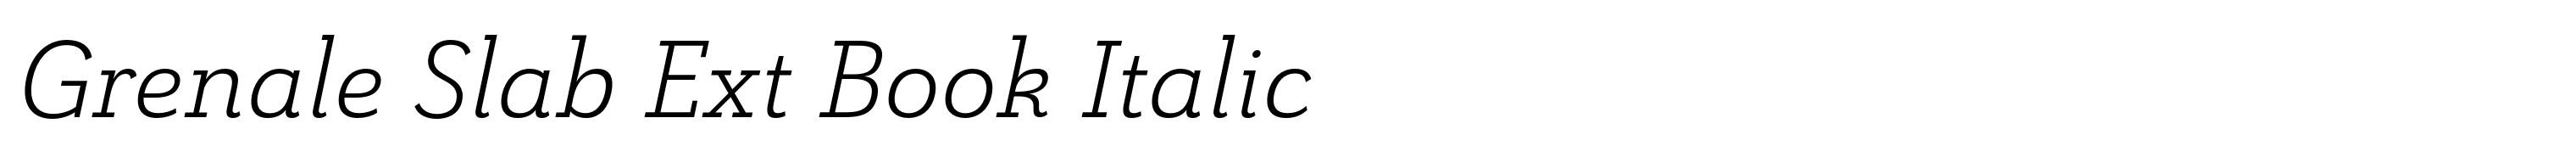 Grenale Slab Ext Book Italic